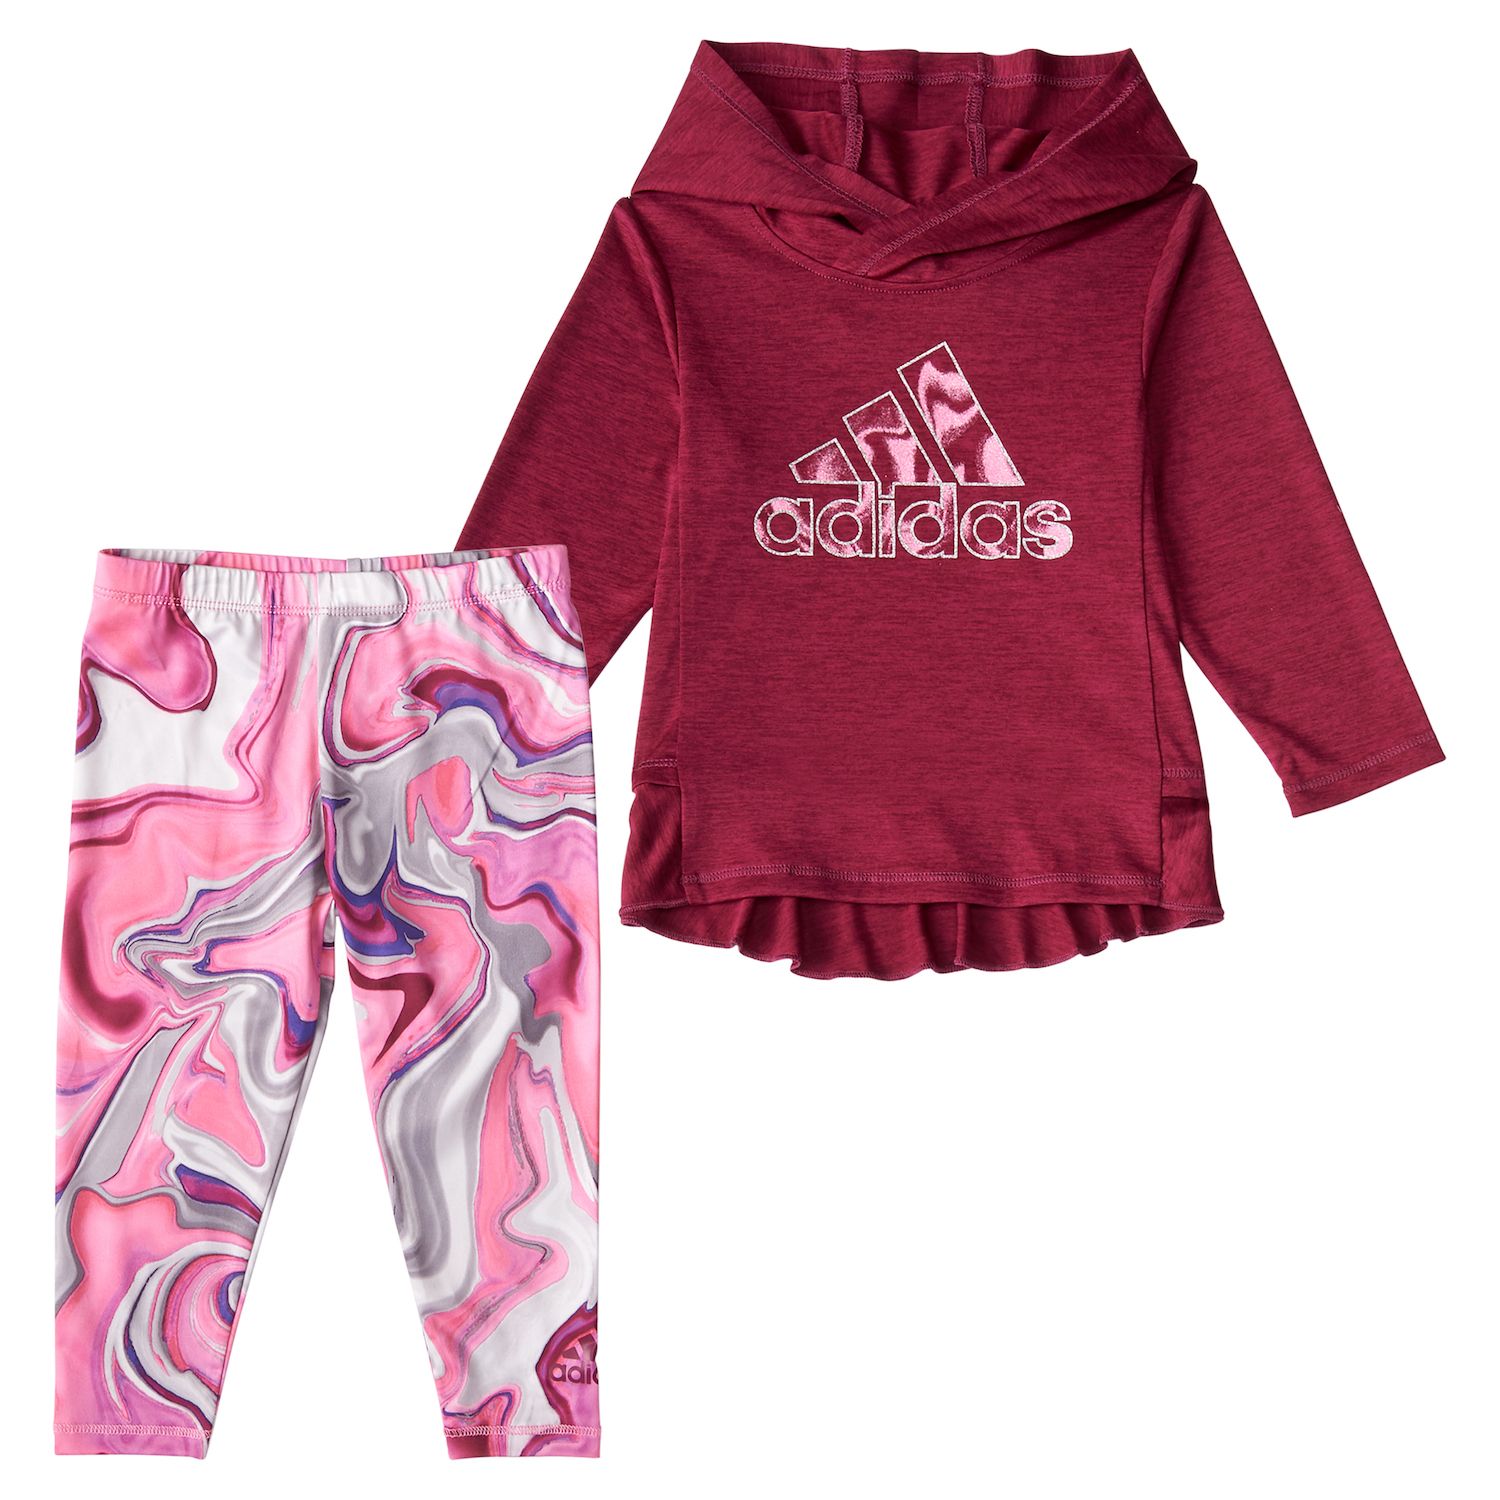 adidas baby girl outfit